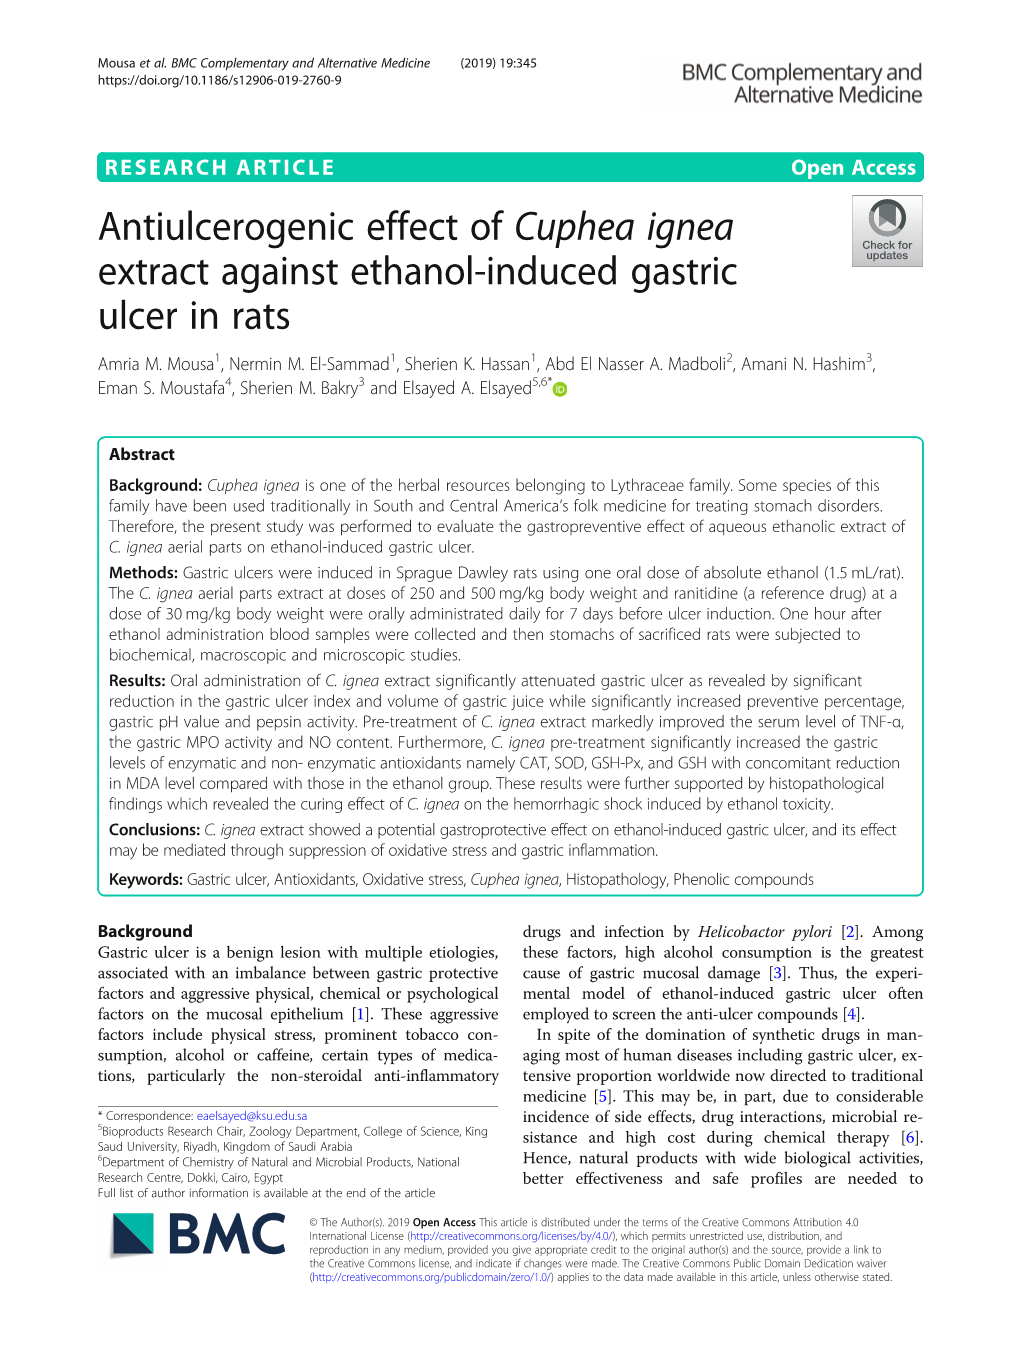 Antiulcerogenic Effect of Cuphea Ignea Extract Against Ethanol-Induced Gastric Ulcer in Rats Amria M